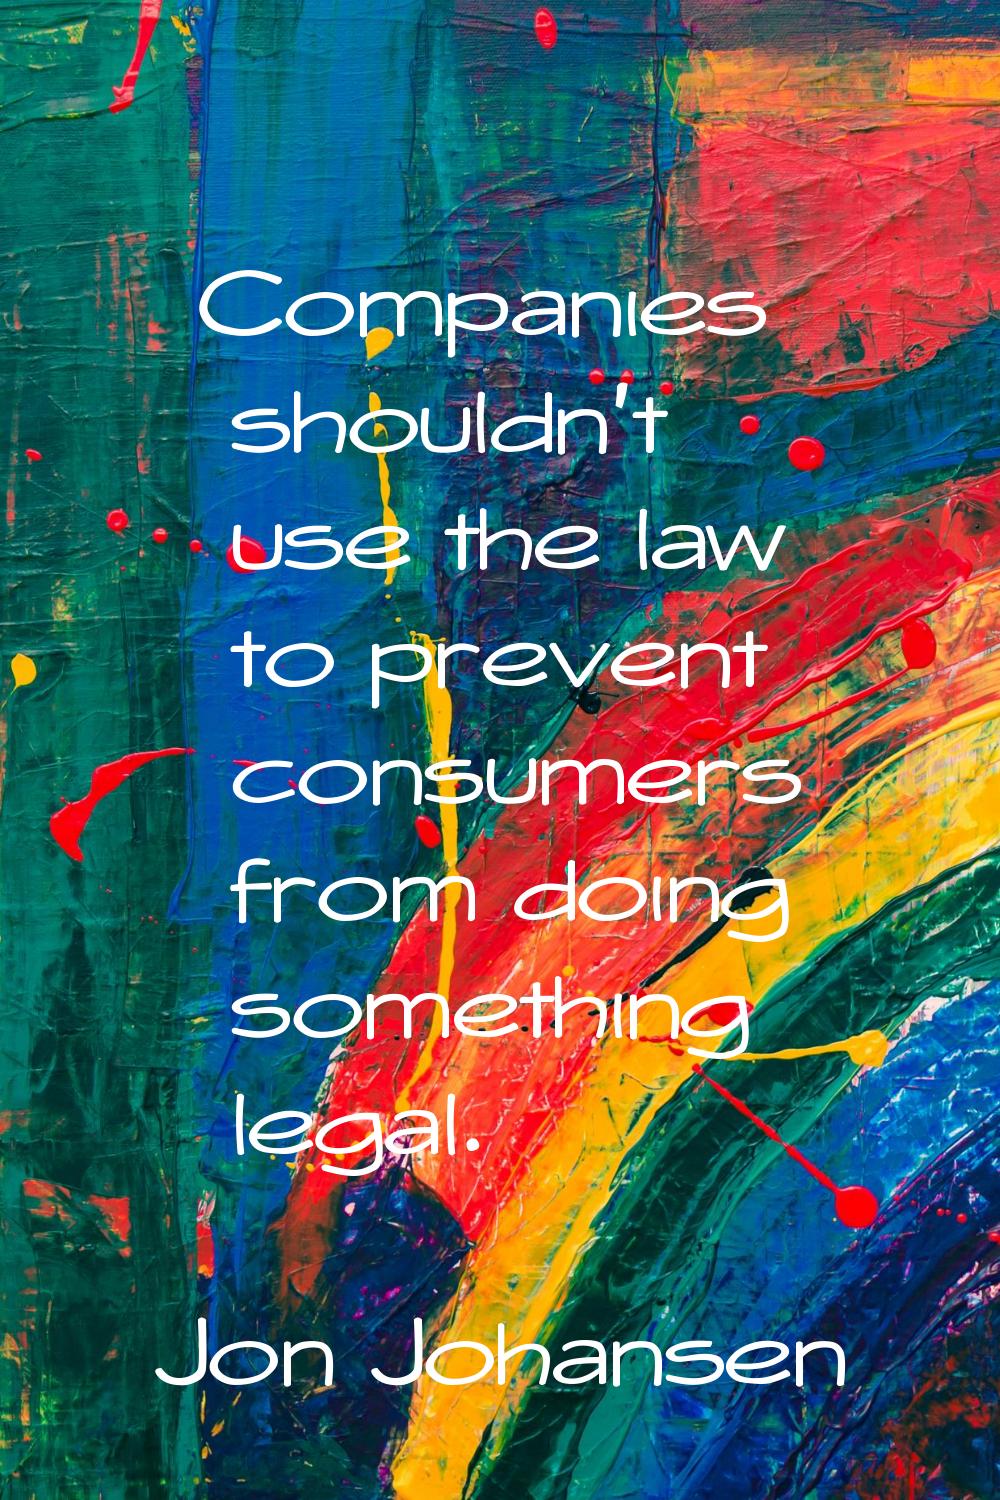 Companies shouldn't use the law to prevent consumers from doing something legal.